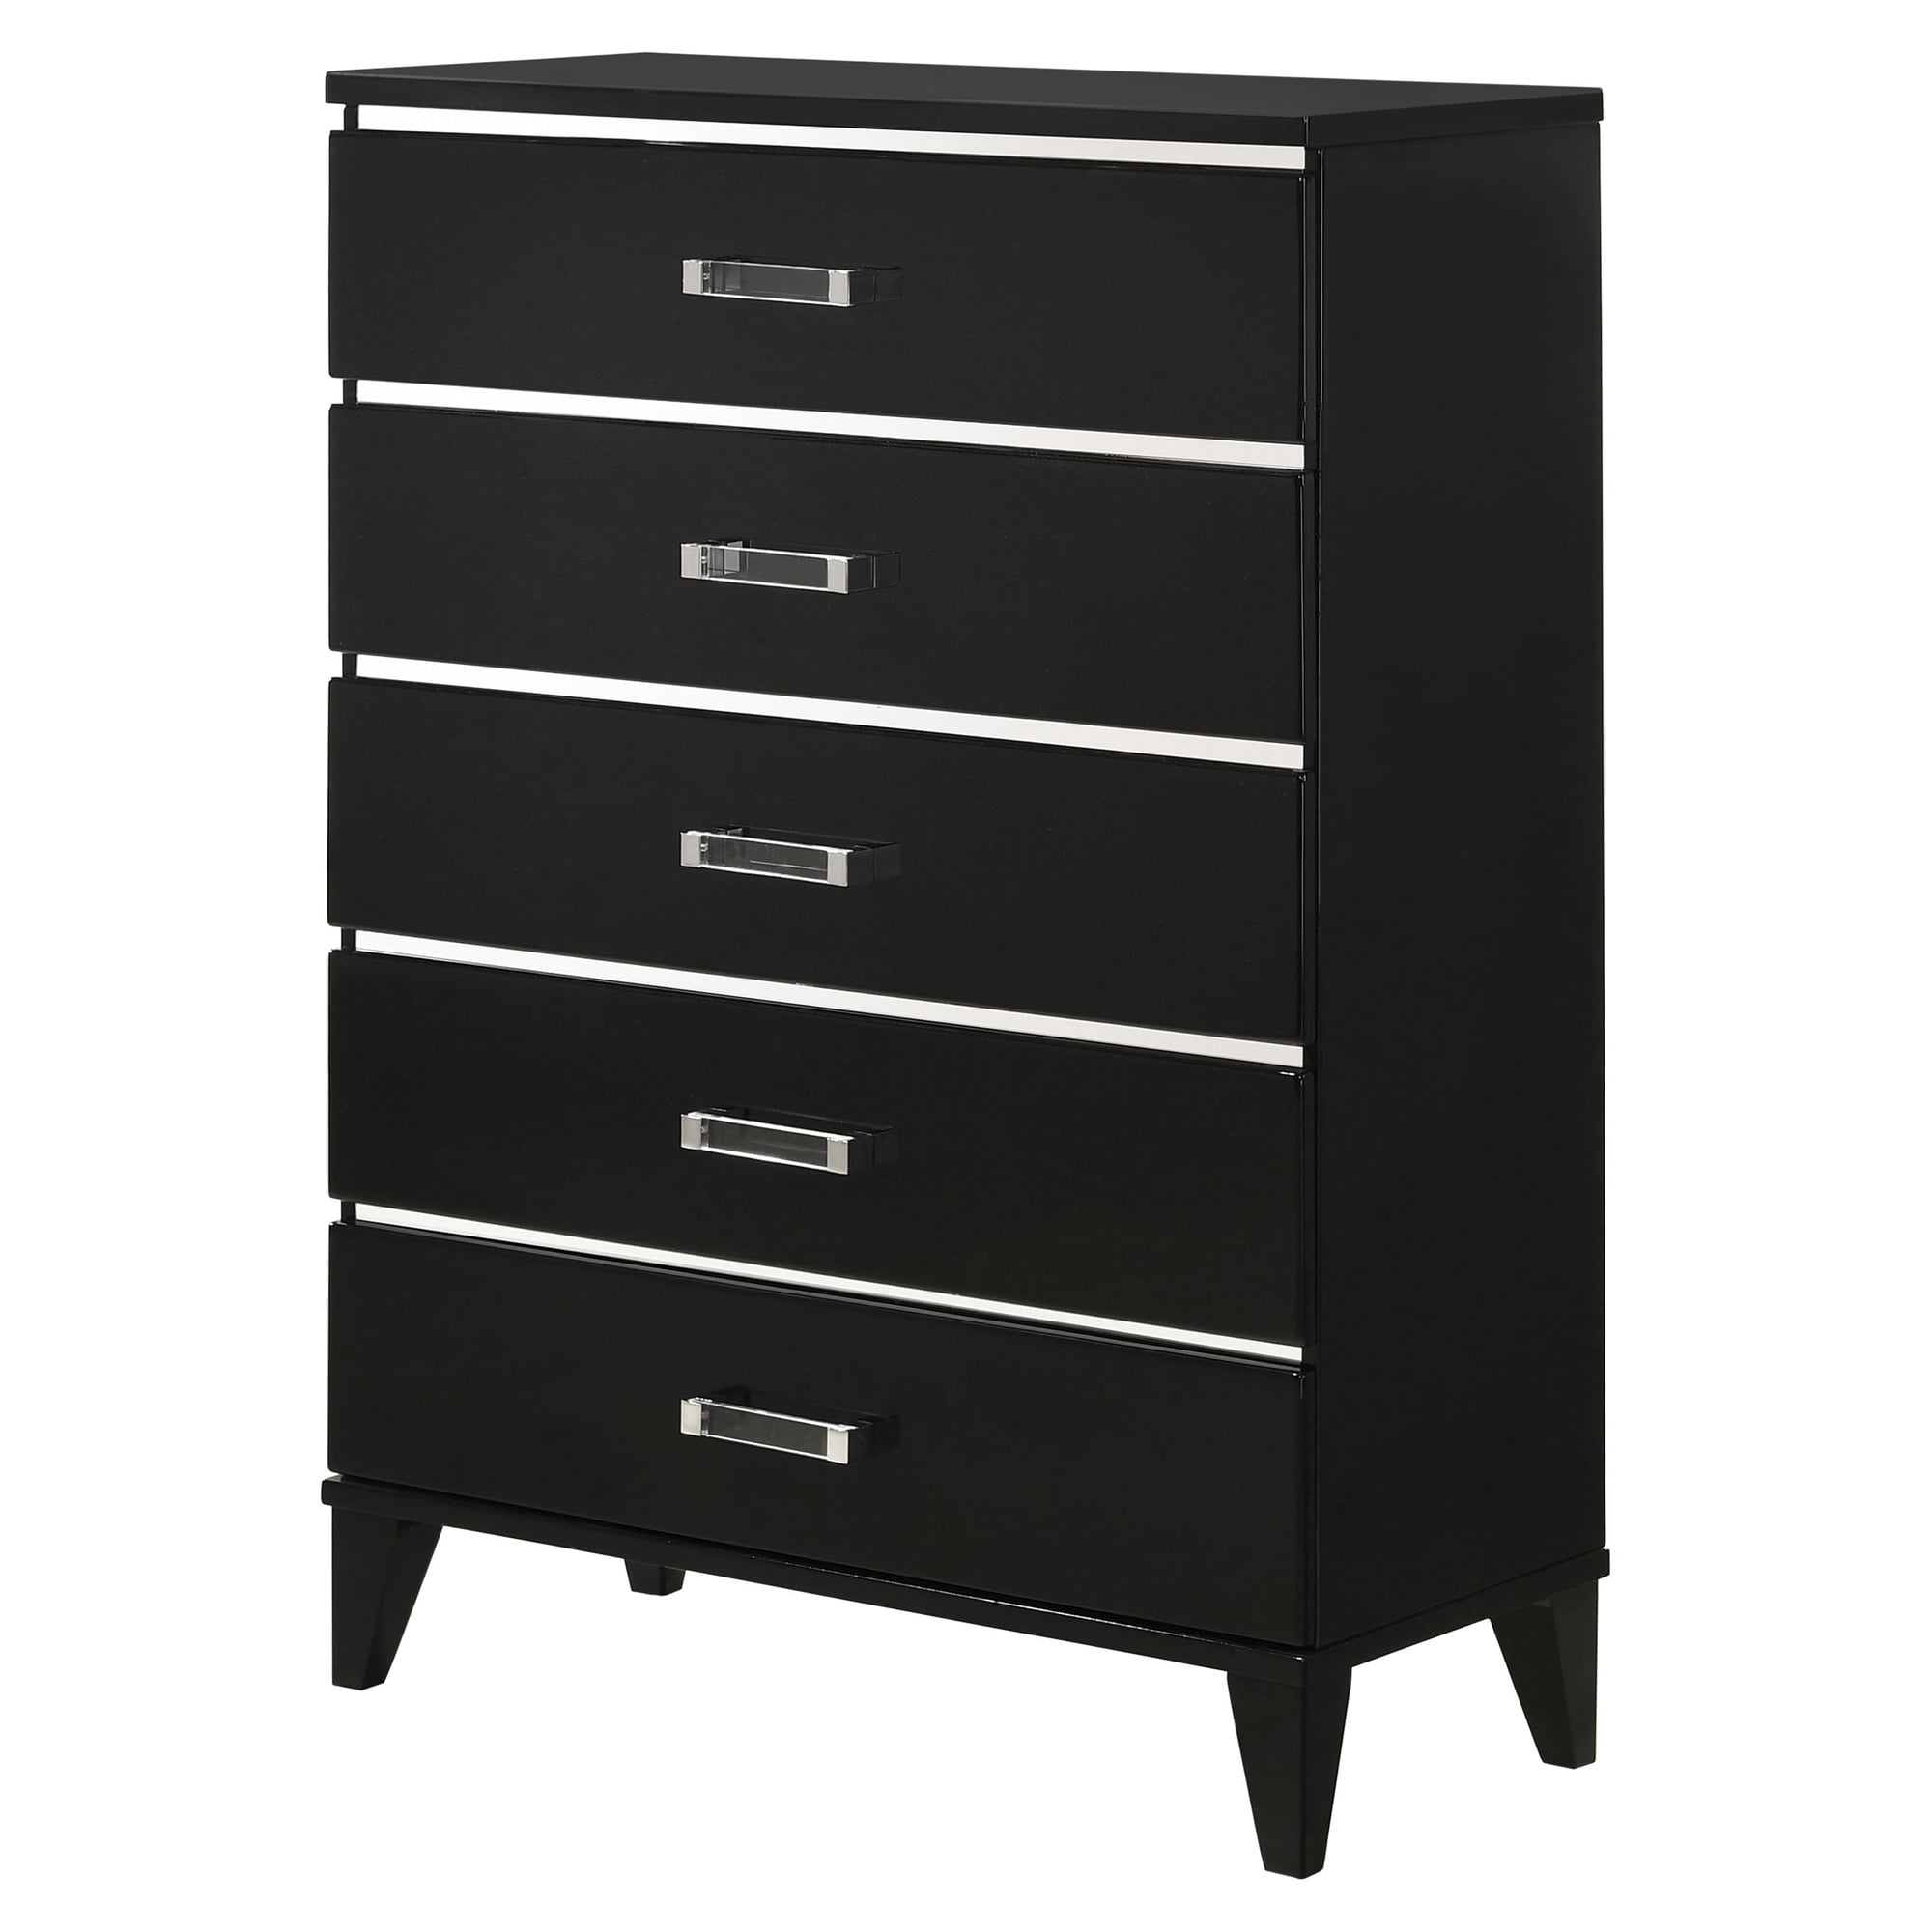 Picture of Acme Furniture 27416 35 x 16 x 49 in. Chelsie Chest, Black